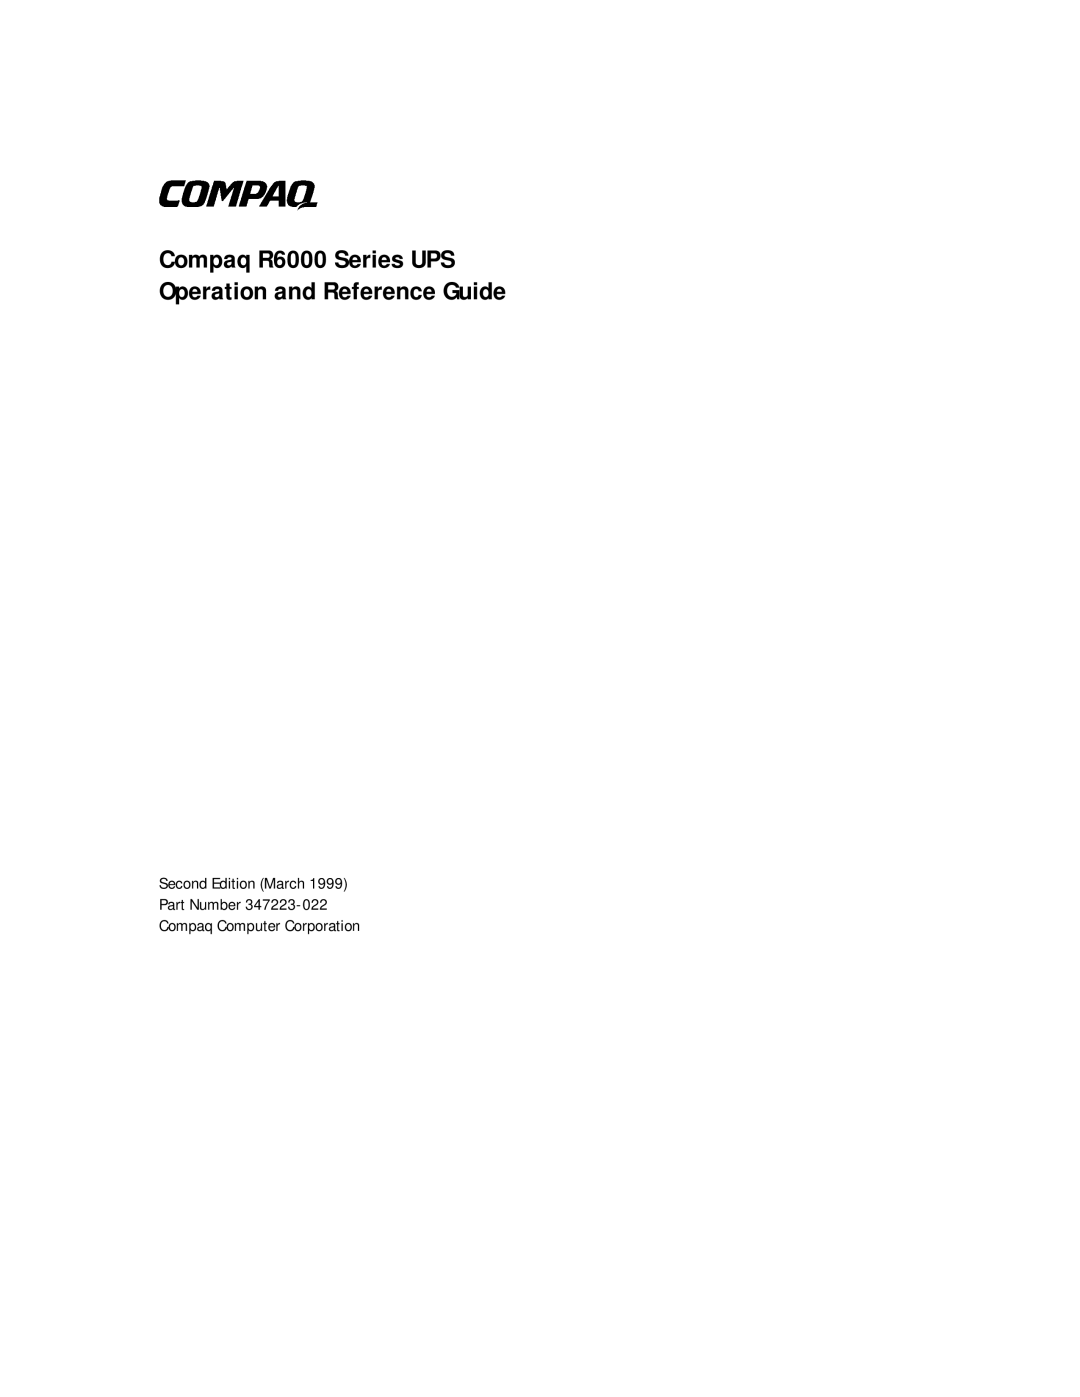 Compaq manual Compaq R6000 Series UPS Operation and Reference Guide 